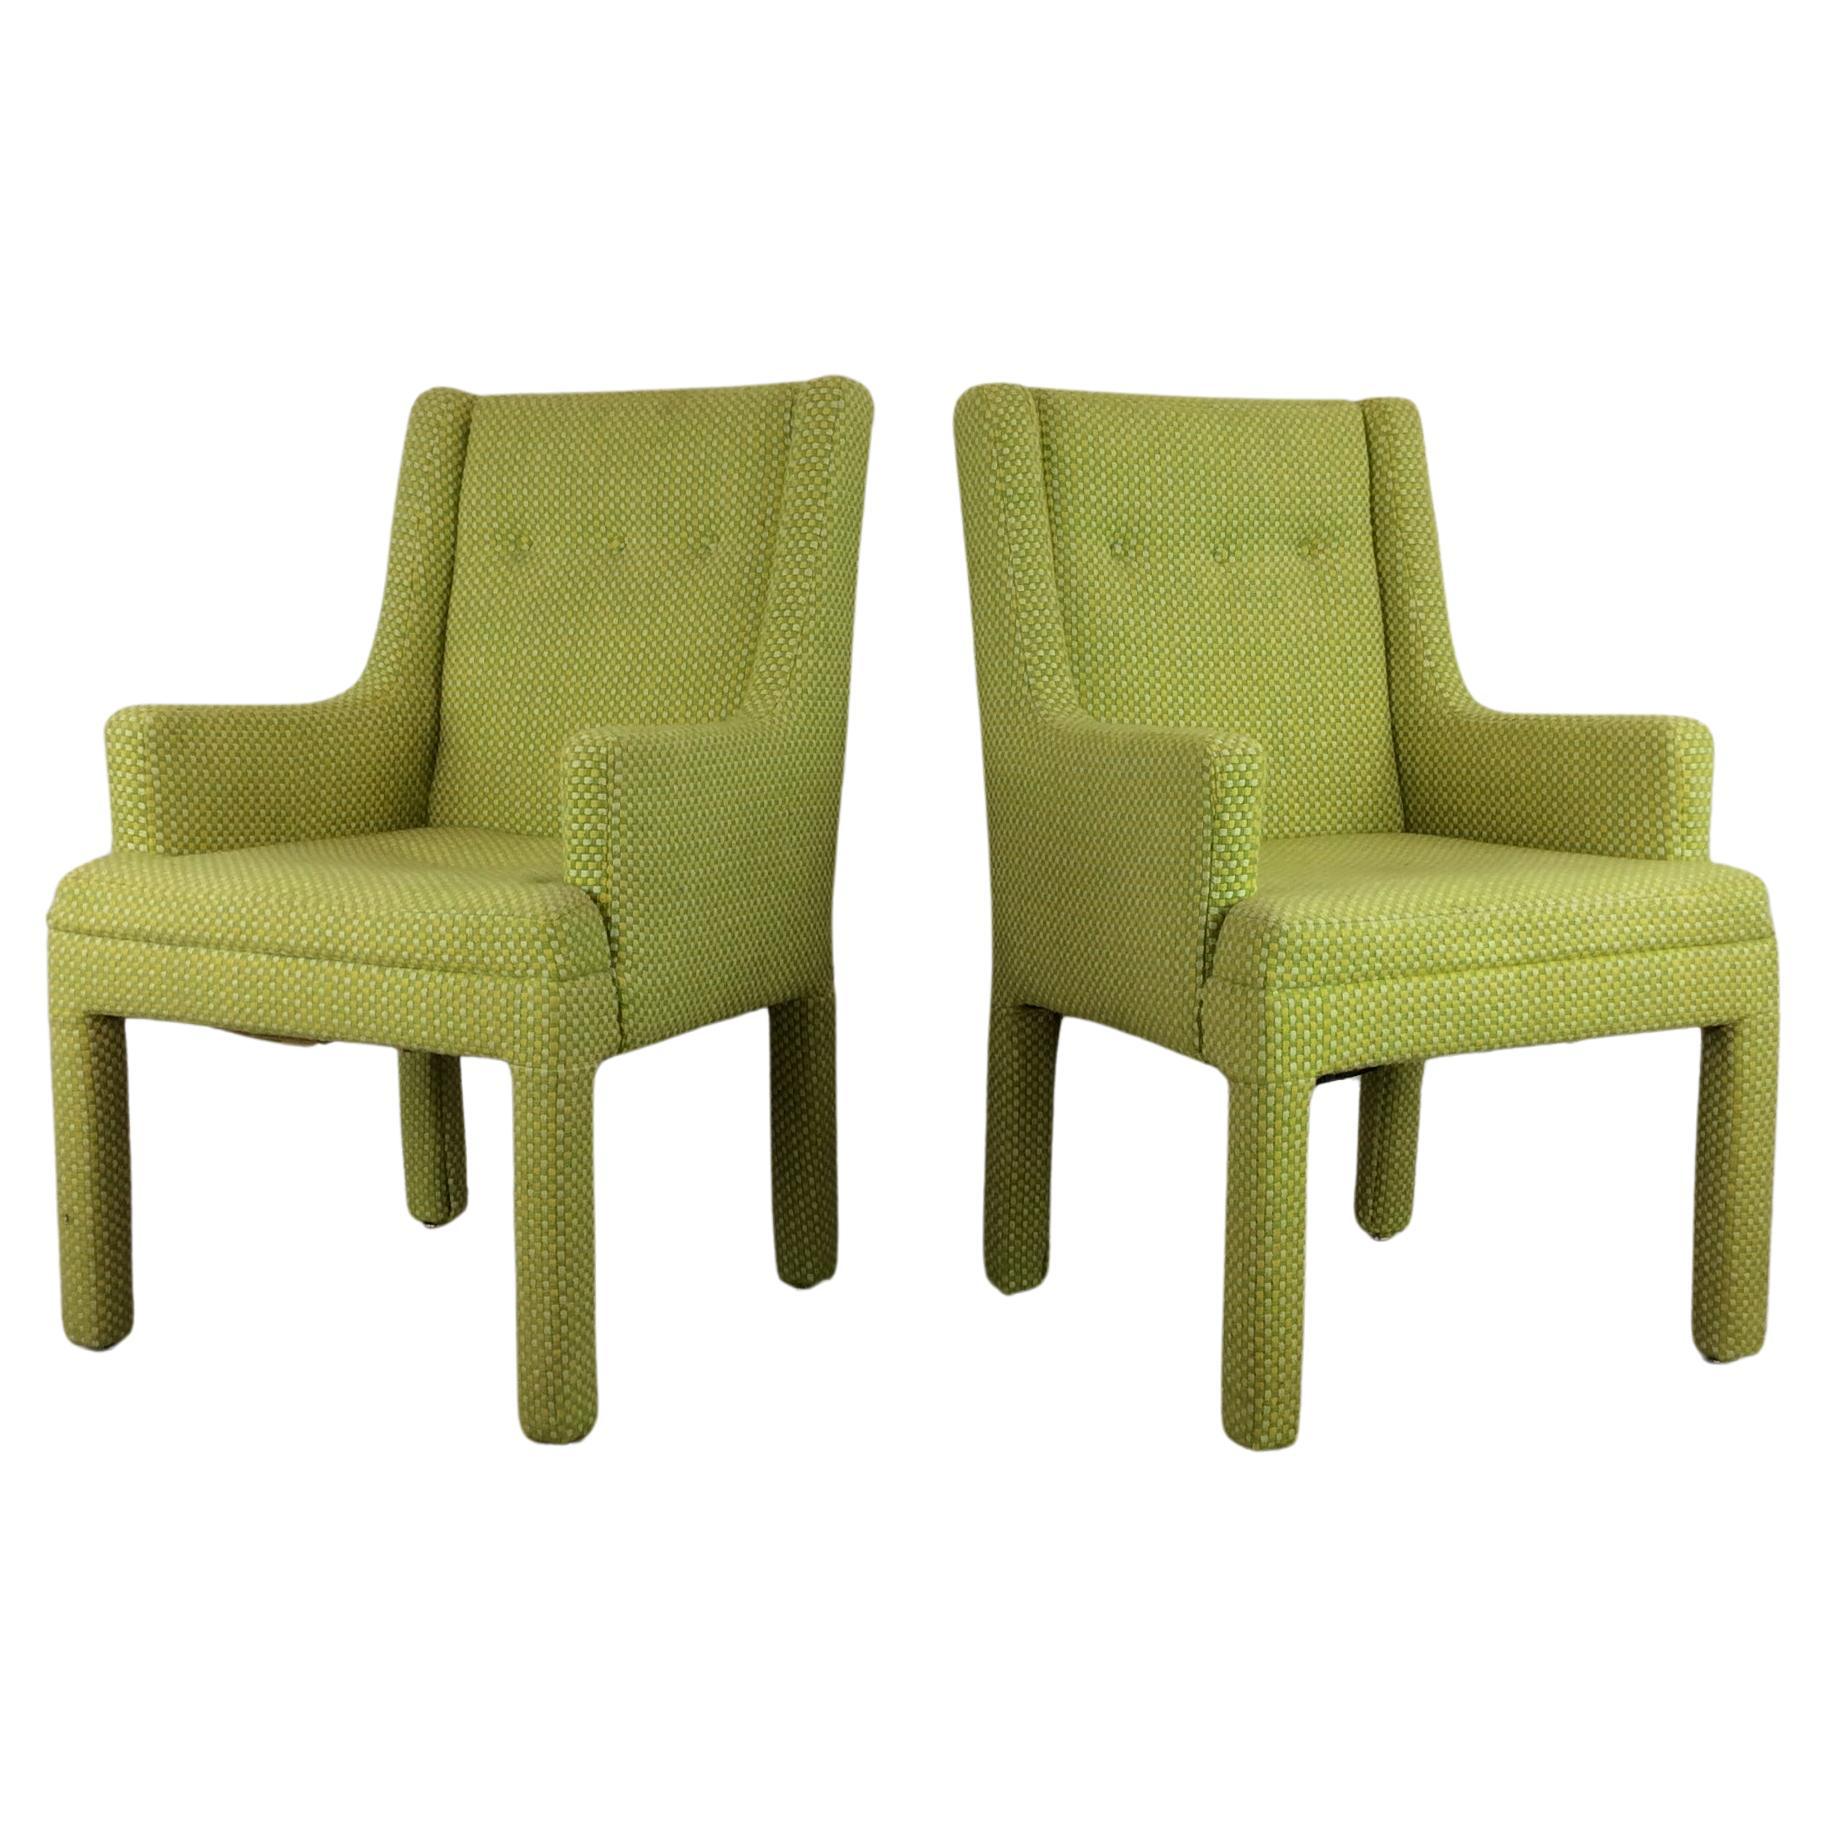 Pair of Mid Century Modern Green Armchairs with Tufted Seat Back For Sale